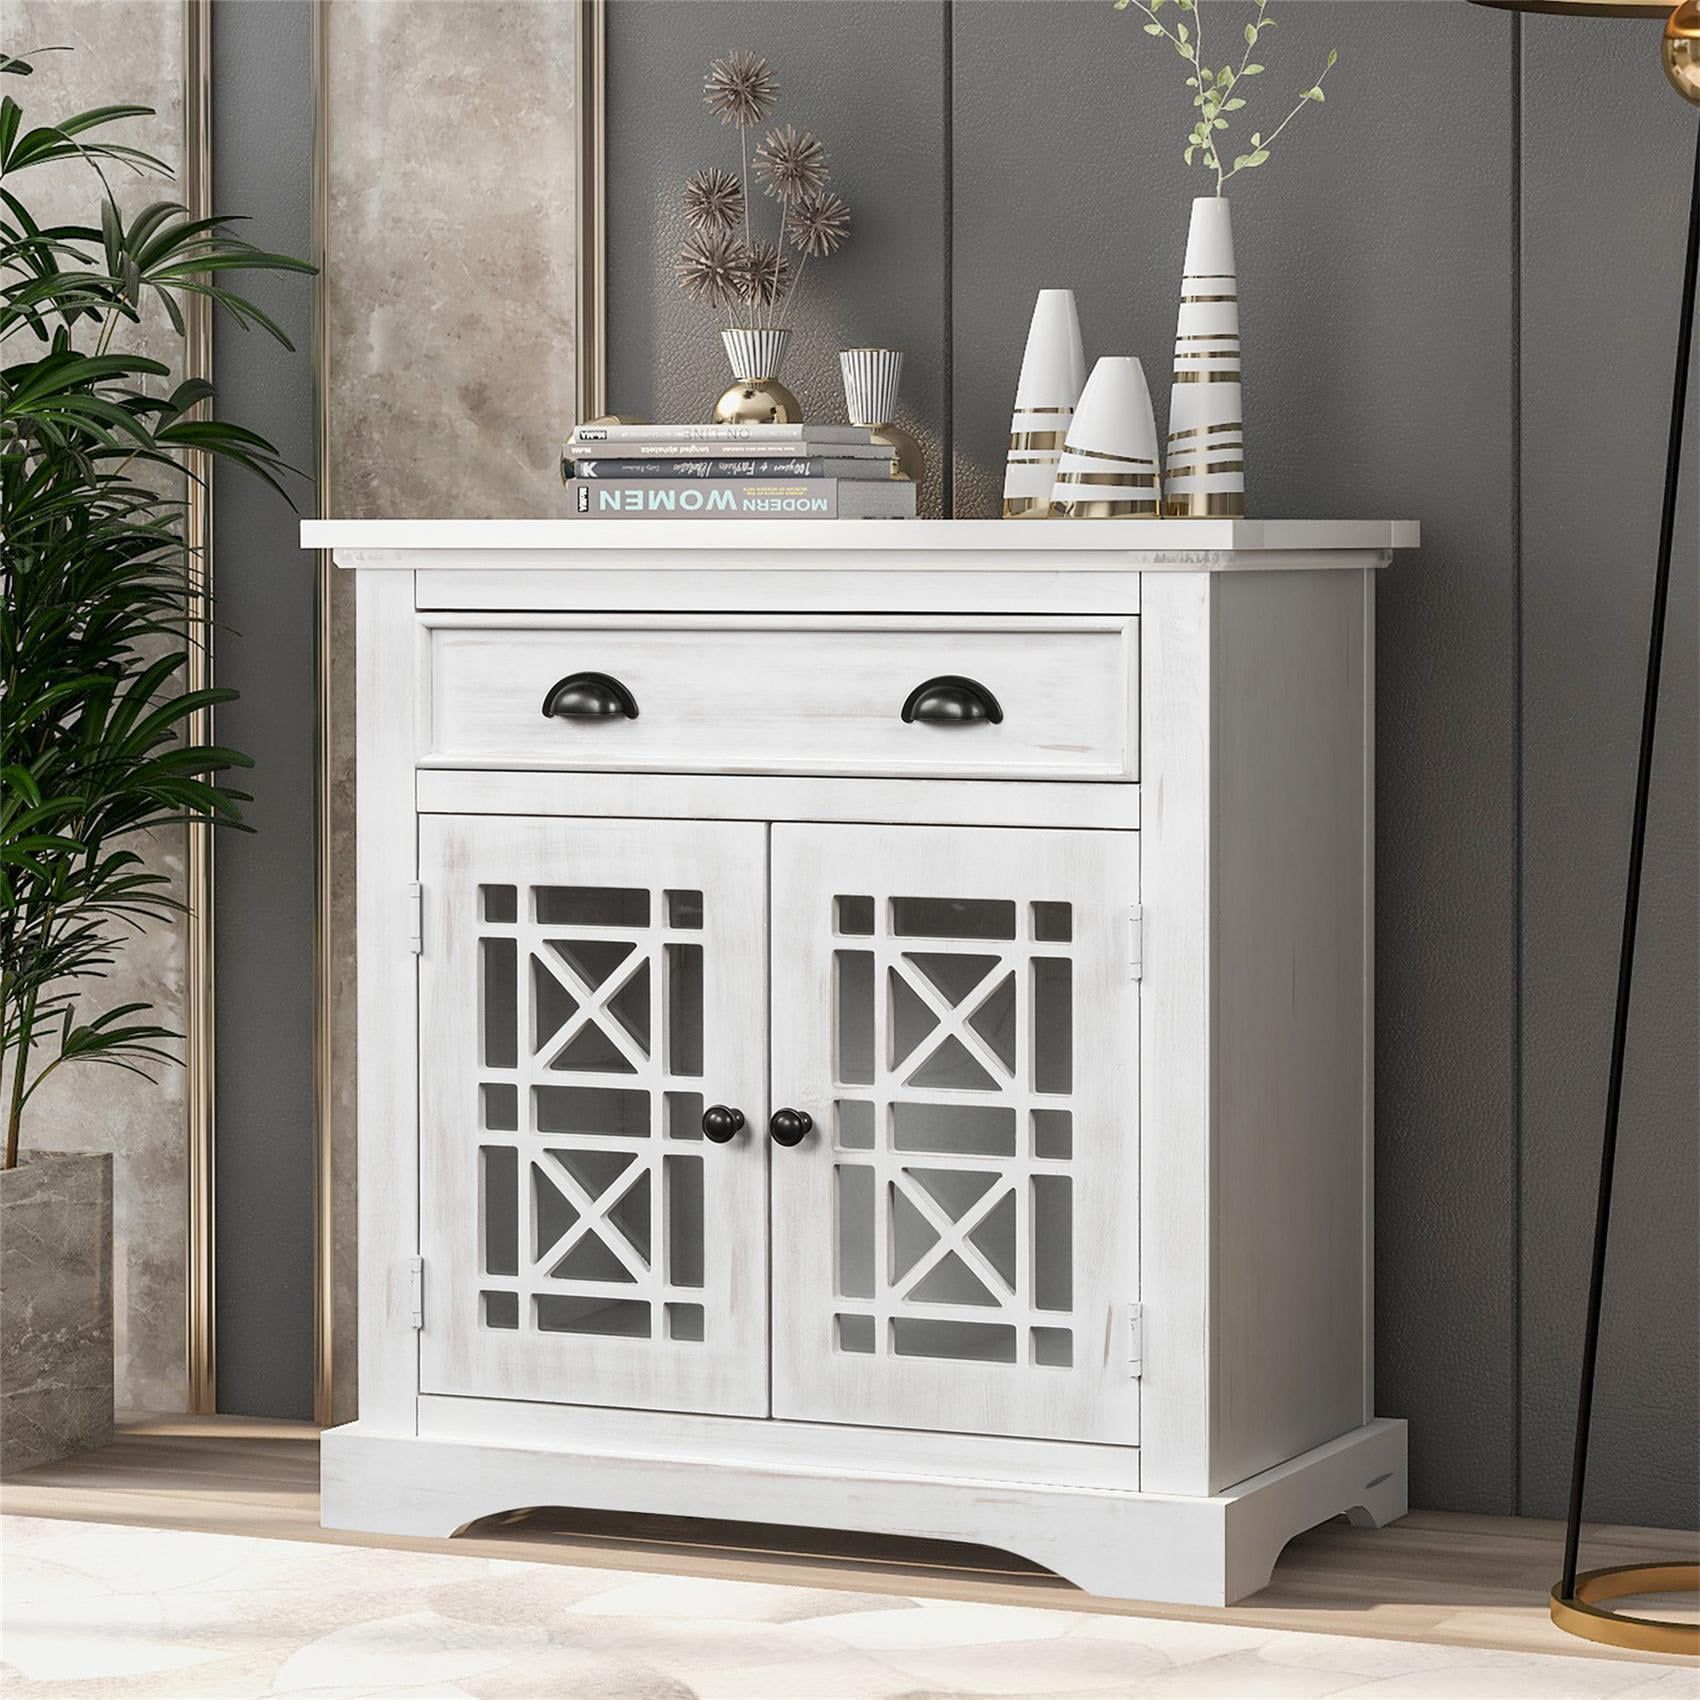 White Rectangular Storage Cabinet, Console Sofa Table Wih Cabinet And In Freestanding Tables With Drawers (View 8 of 20)